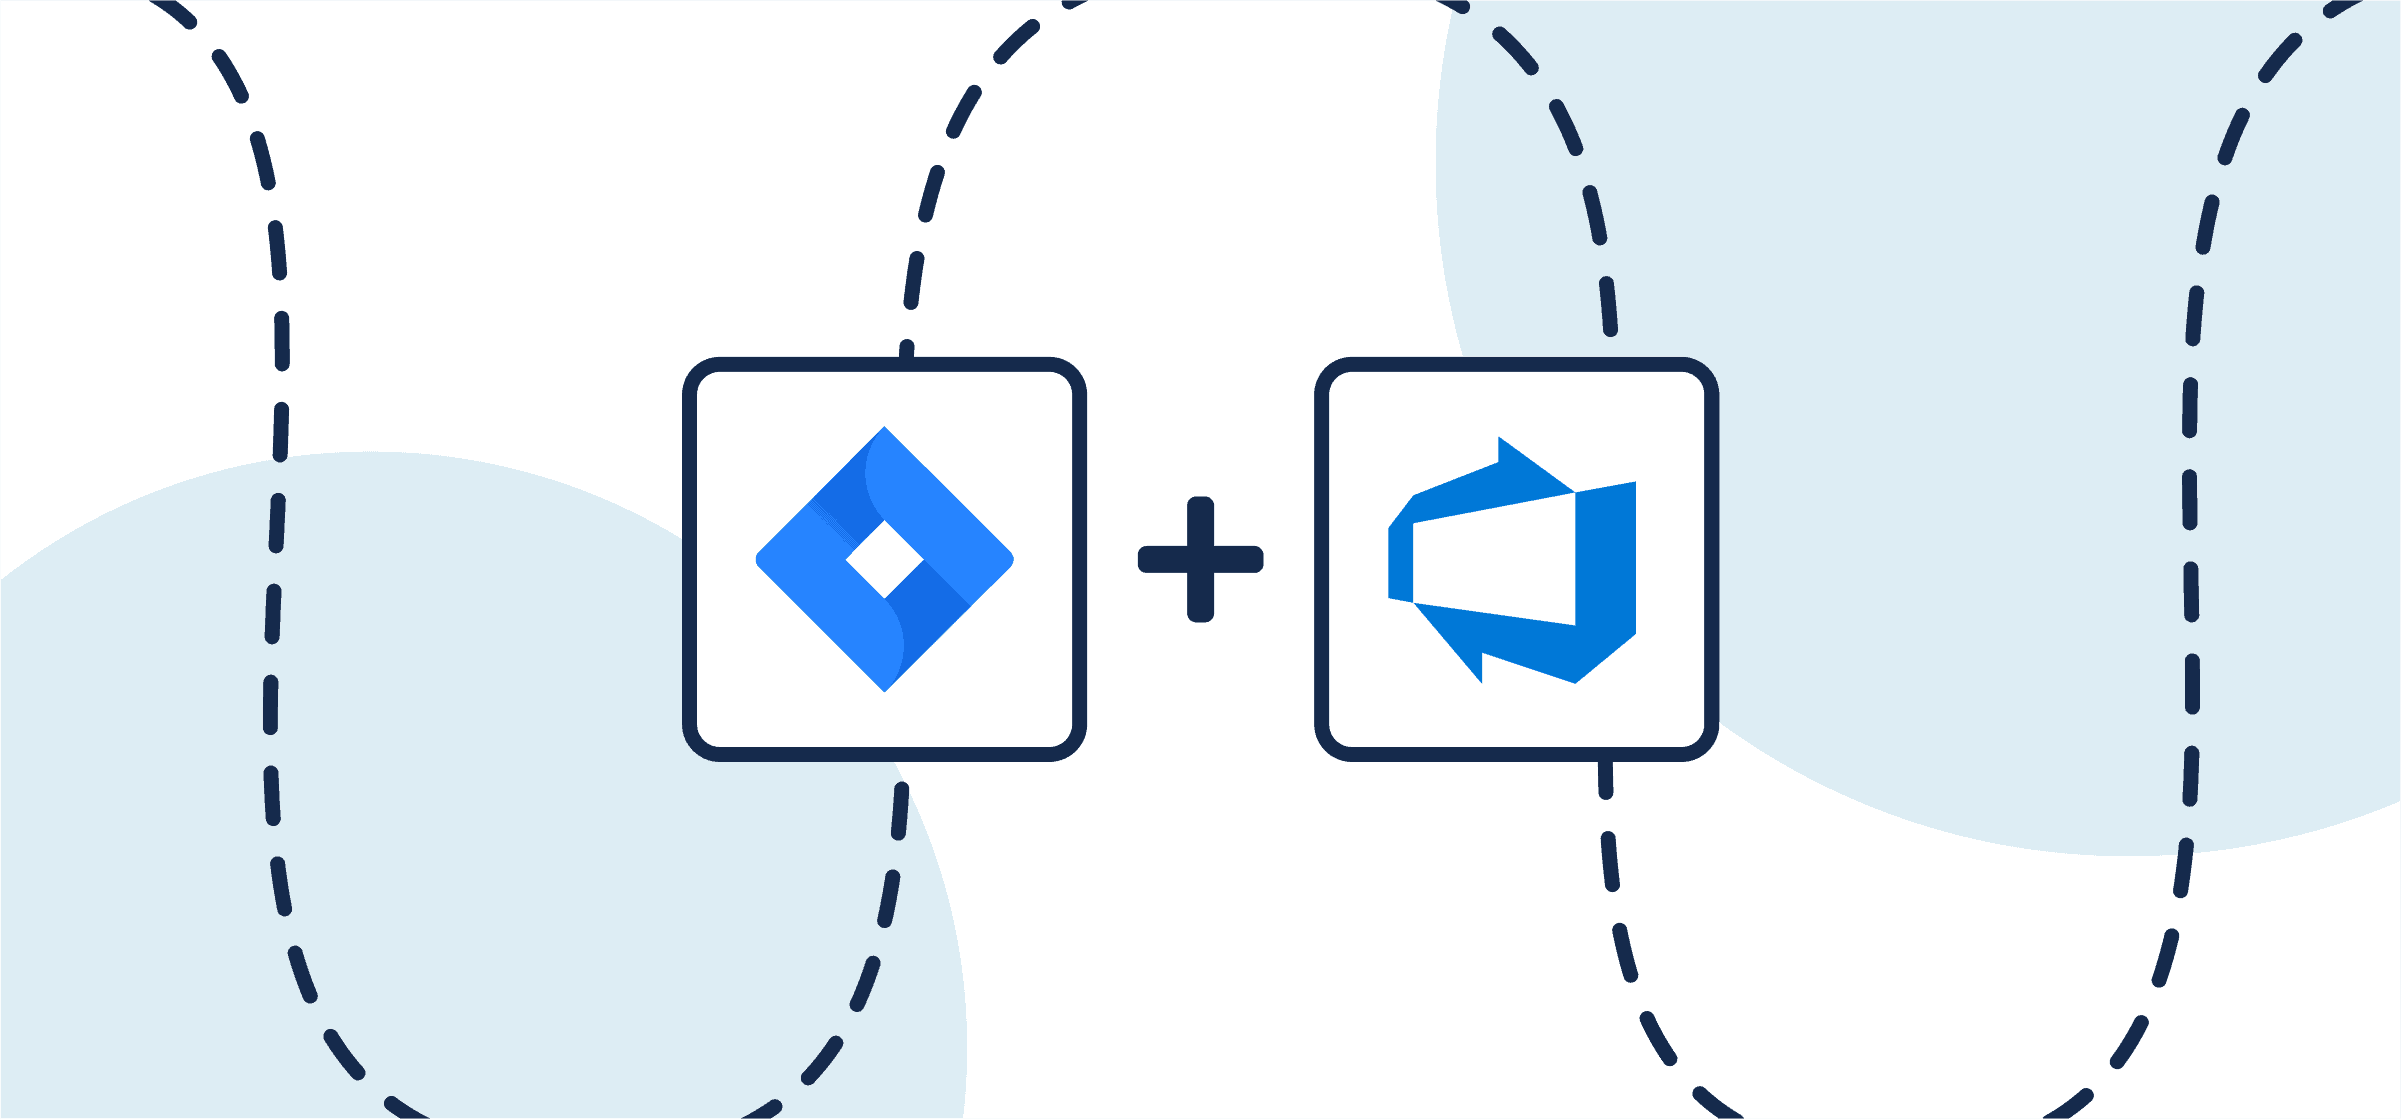 Logos for Jira and azure devops, representing a walkthrough for 2-way sync between these tools with Unito.